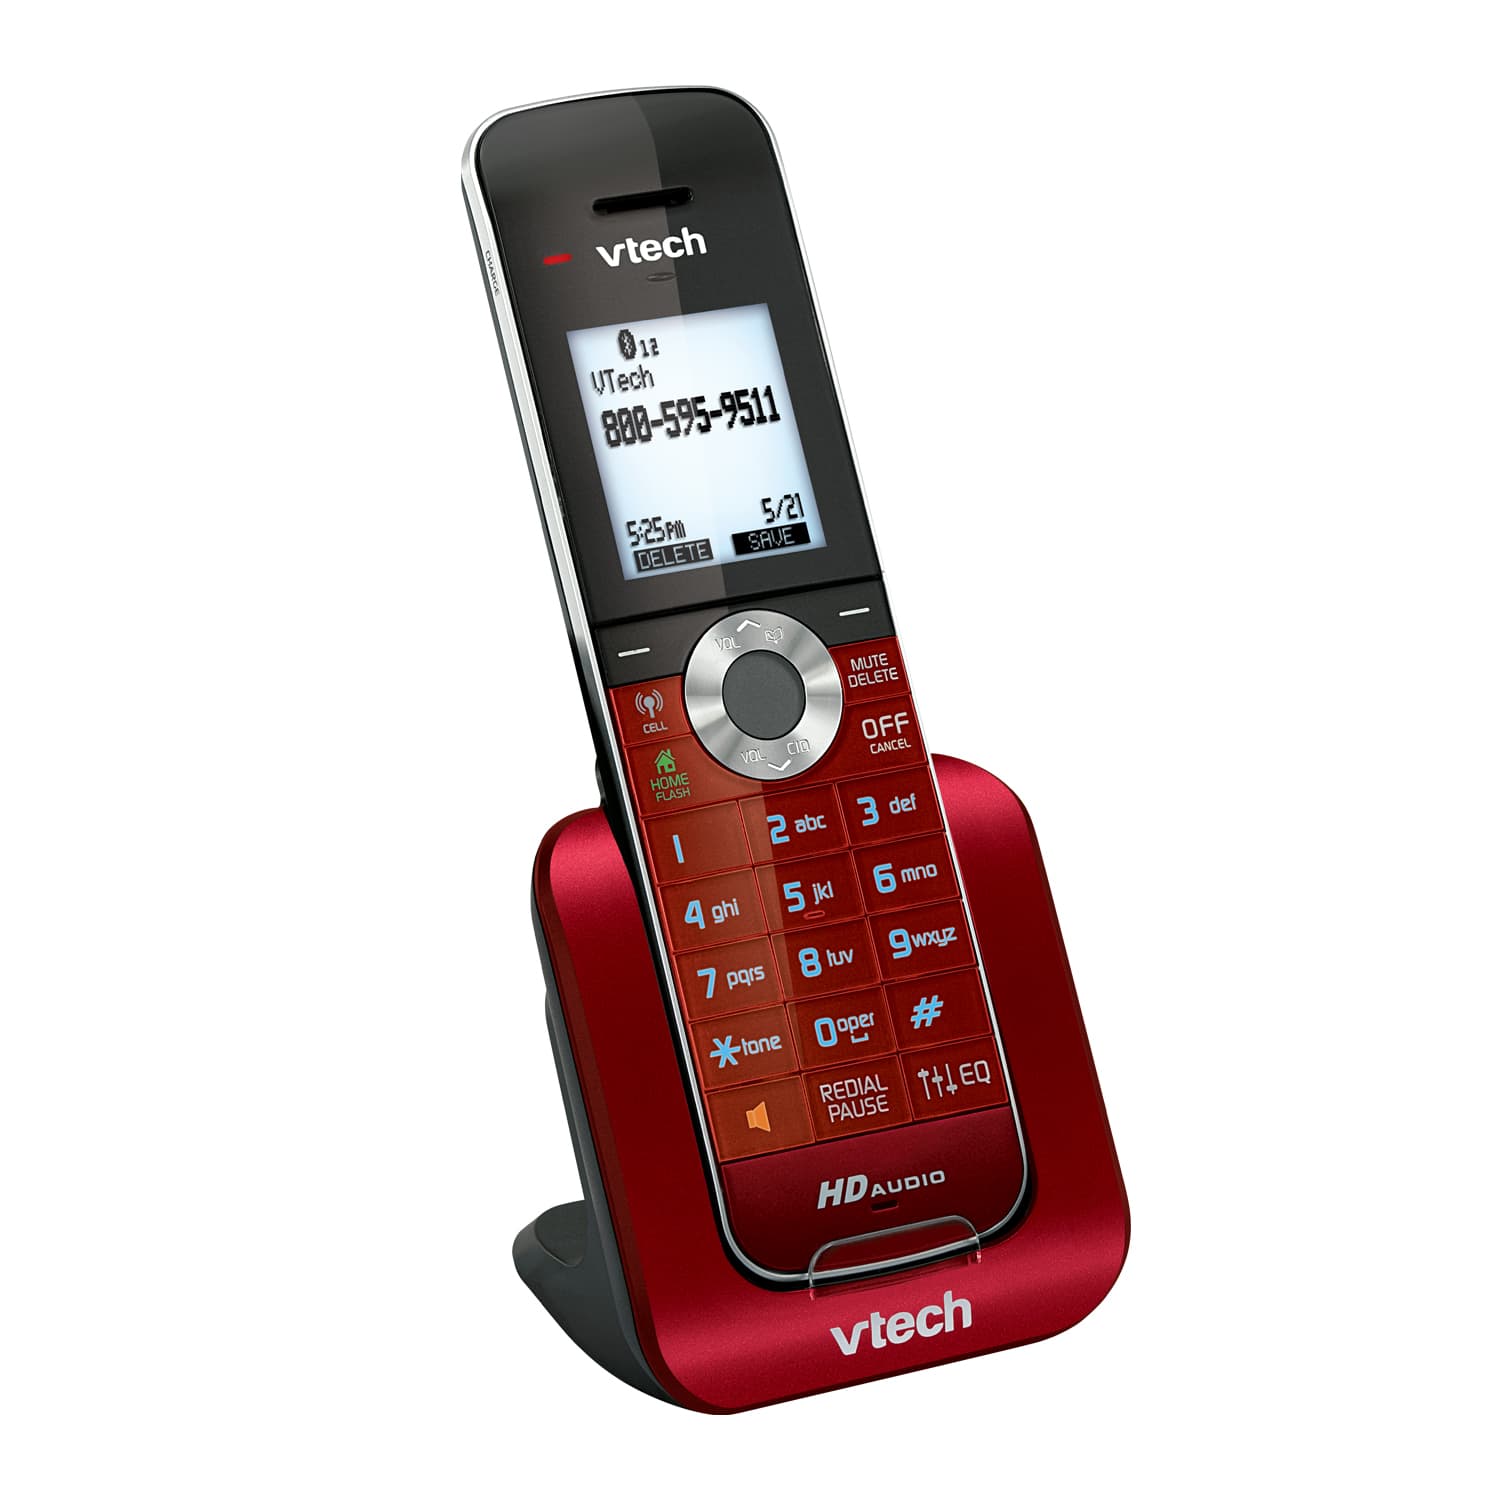 4 Handset Connect to Cell™ Answering System with Caller ID/Call Waiting - view 8